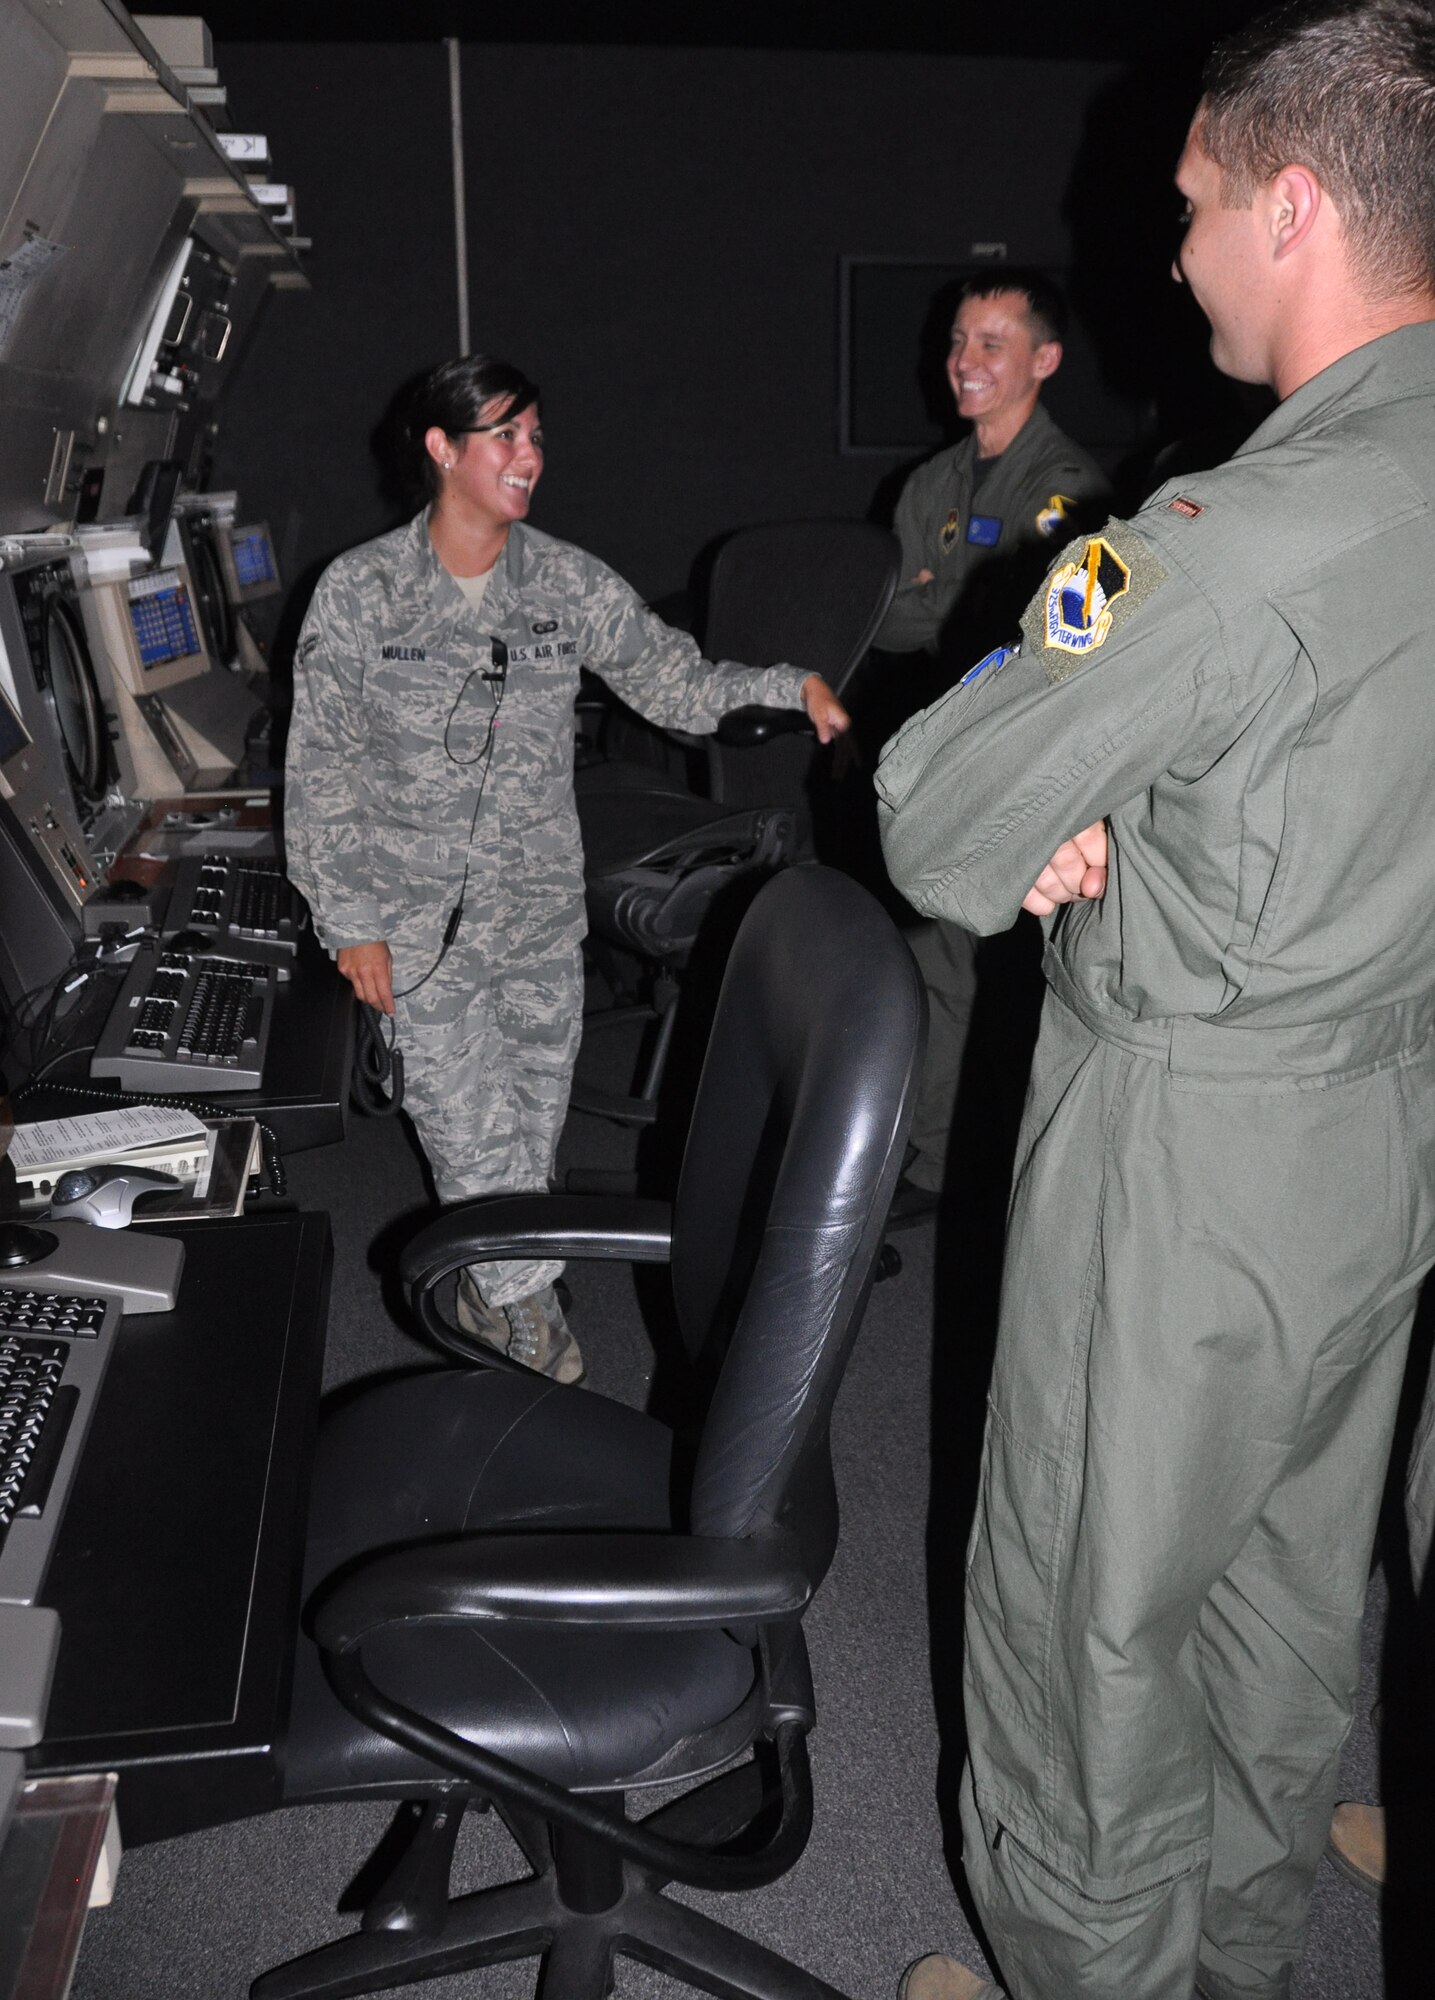 Airman 1st Class Evangelina Mullen, 325th Operation Support Squadron air traffic controller, gives a tour of the Radar Approach Control facility to U.S. Air Force Academy cadets participating in Operation Air Force. Every summer students from the U.S. Air Force Academy and members of the Reserve Officer Training Corps are given the opportunity to go through a three-week program at various Air Force bases to immerse them in the Air Force way of life and assist them in understanding what each career field has to offer. (U.S. Air Force photo by Airman 1st Class Rachelle Elsea)